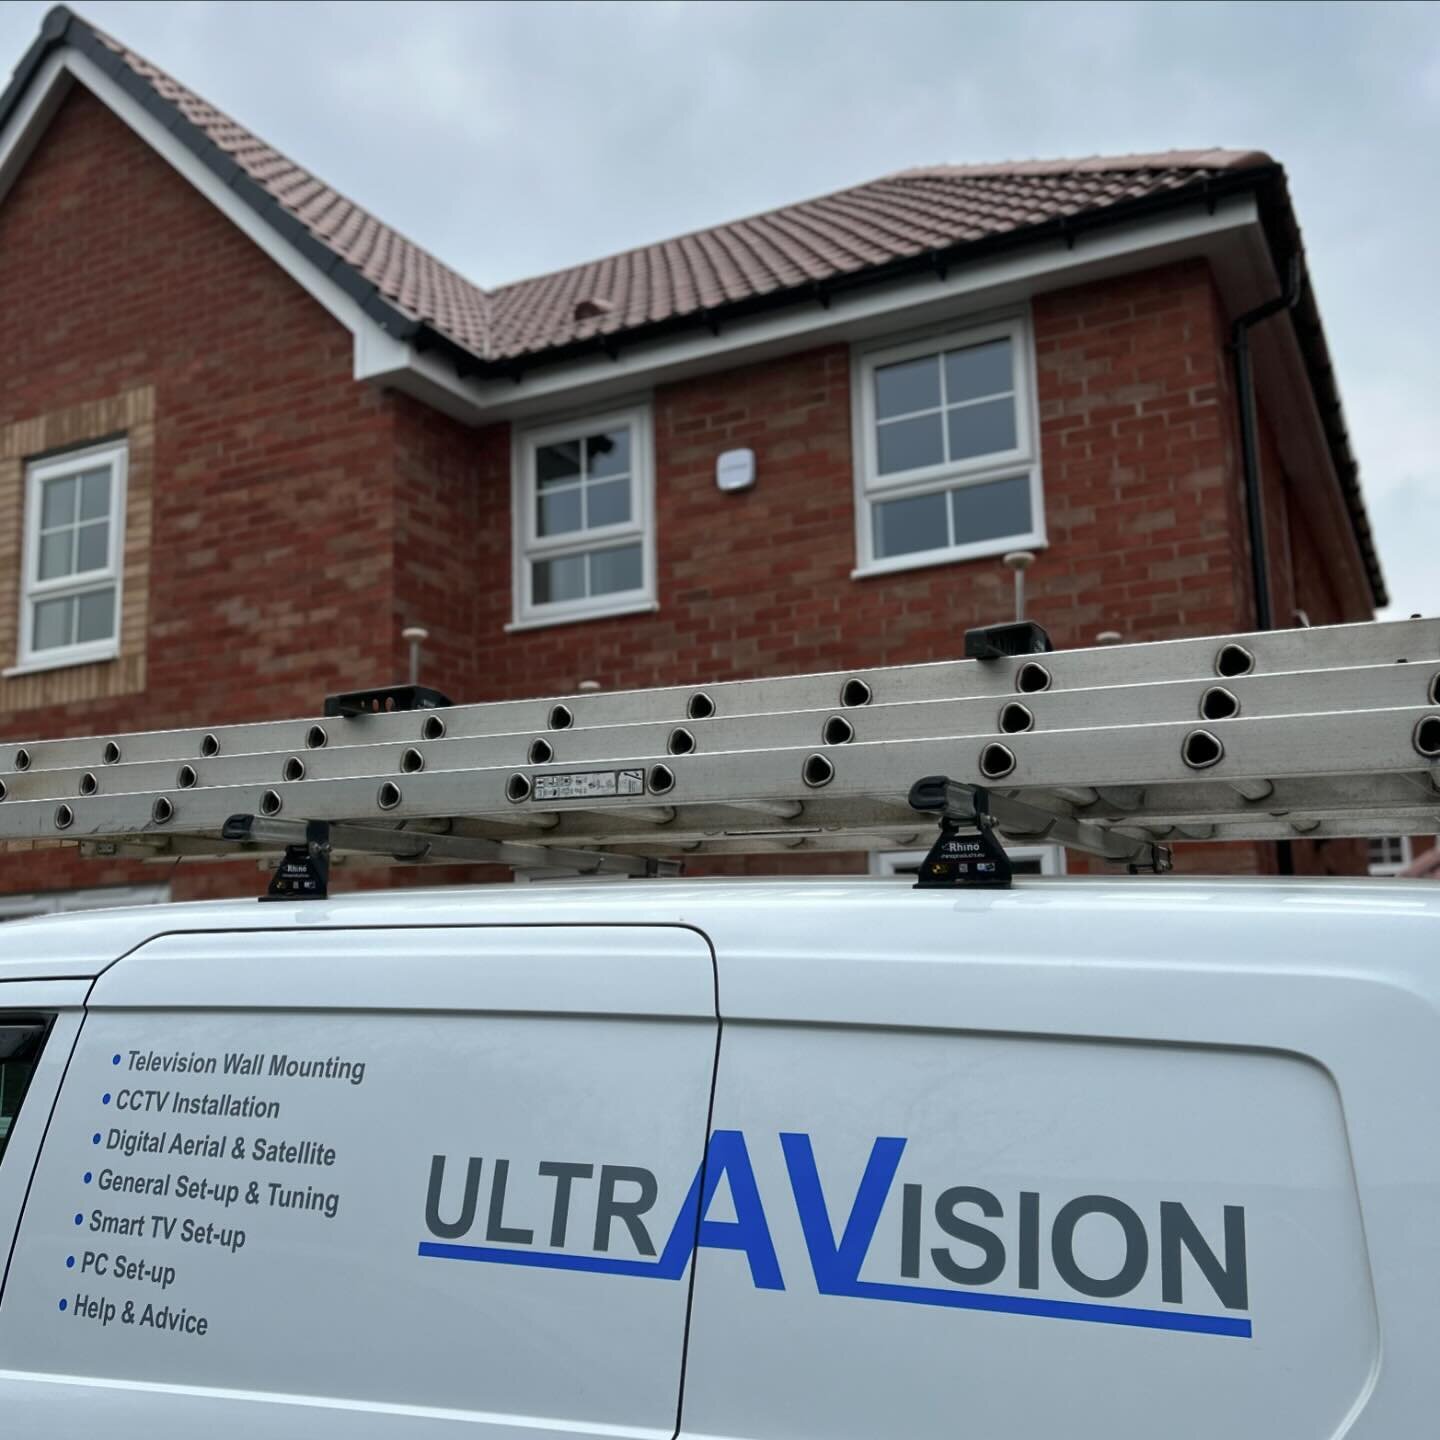 Ajax Alarm installation completed in wigston today.

The Ajax alarm is connected to your phone via a free app so if the alarm goes off you will get an instant alert 🚨 you can also arm/disarm via the app.

If you would like a Free quote or more infor